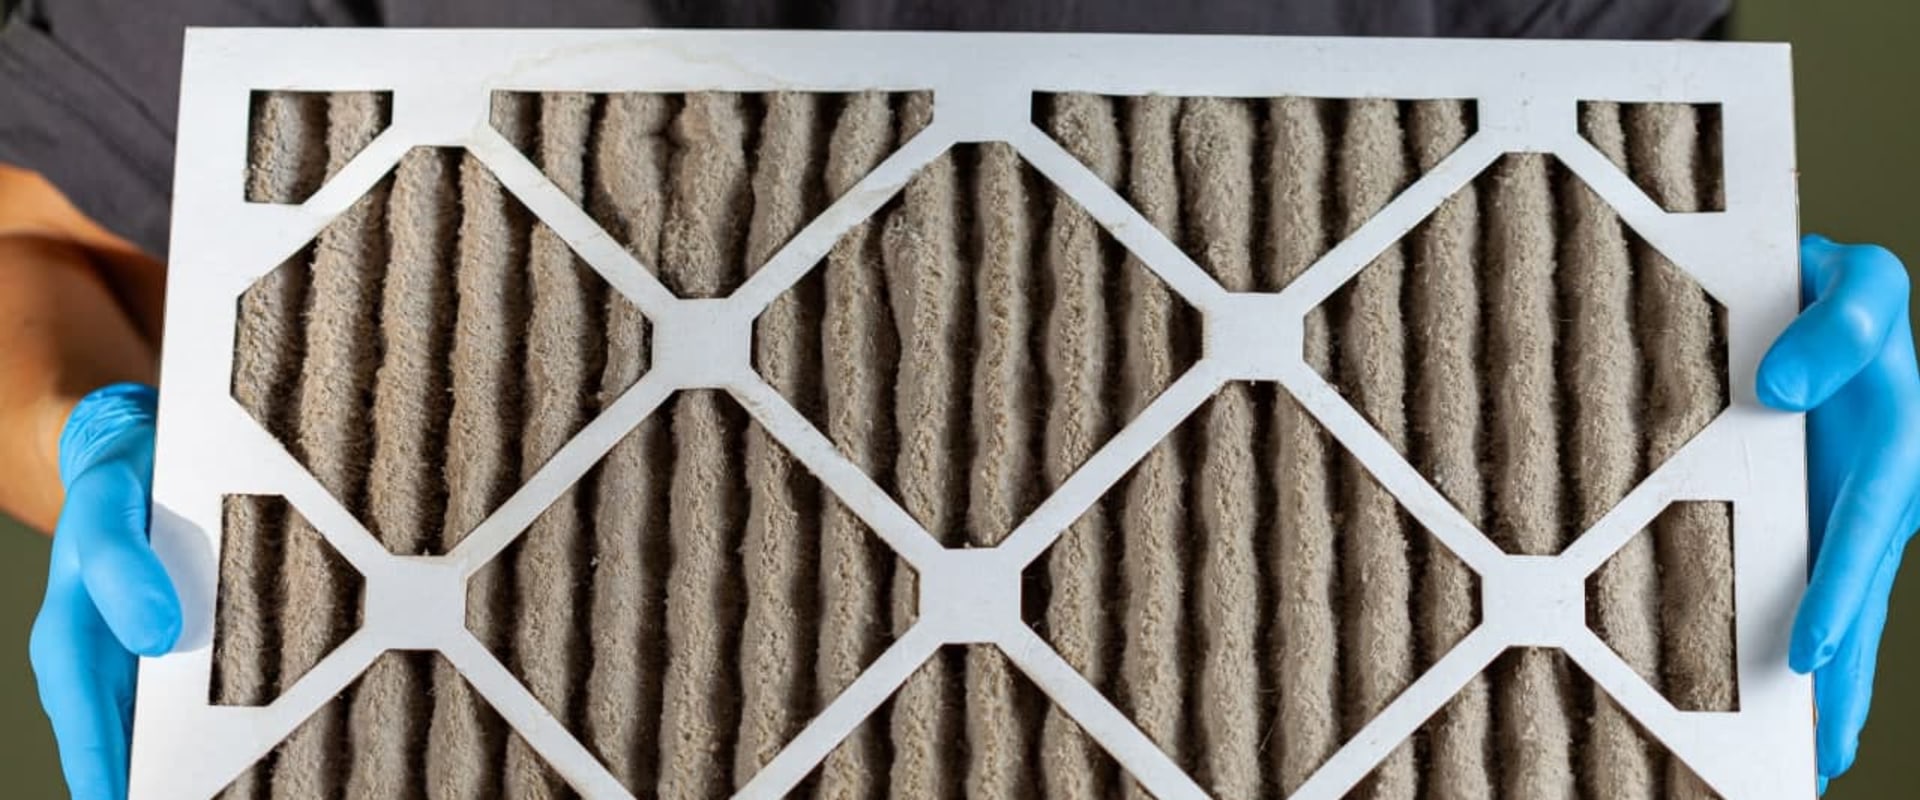 The Role of HVAC Furnace Air Filters 16x25x5 in Maintaining Clean Dyer Vents